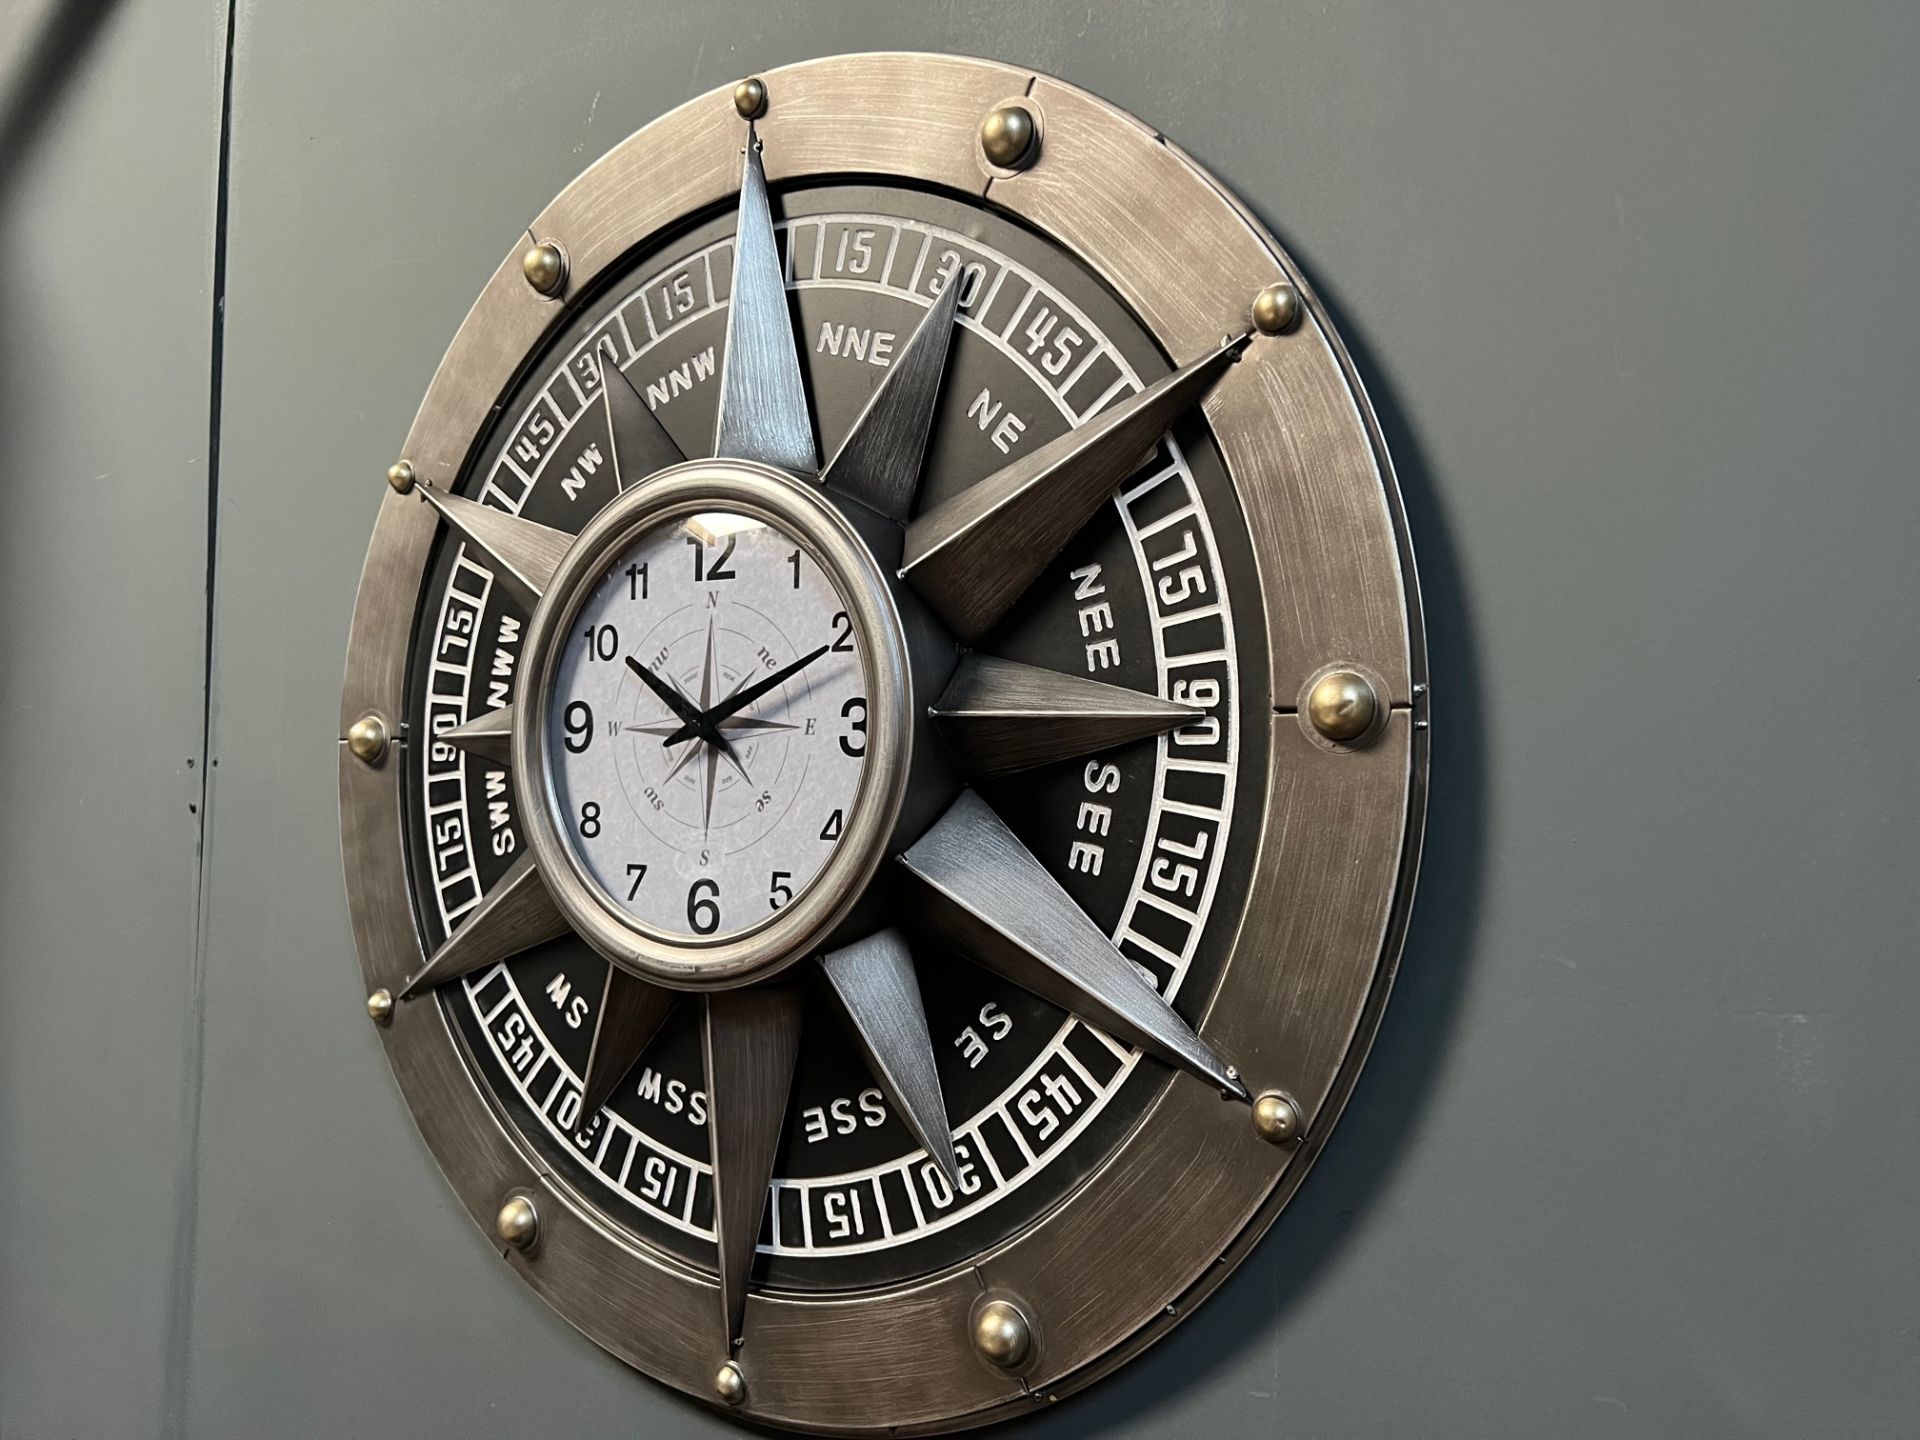 NEW BOXED VINTAGE INDUSTRIAL STYLE COMPASS CLOCK - Image 4 of 4